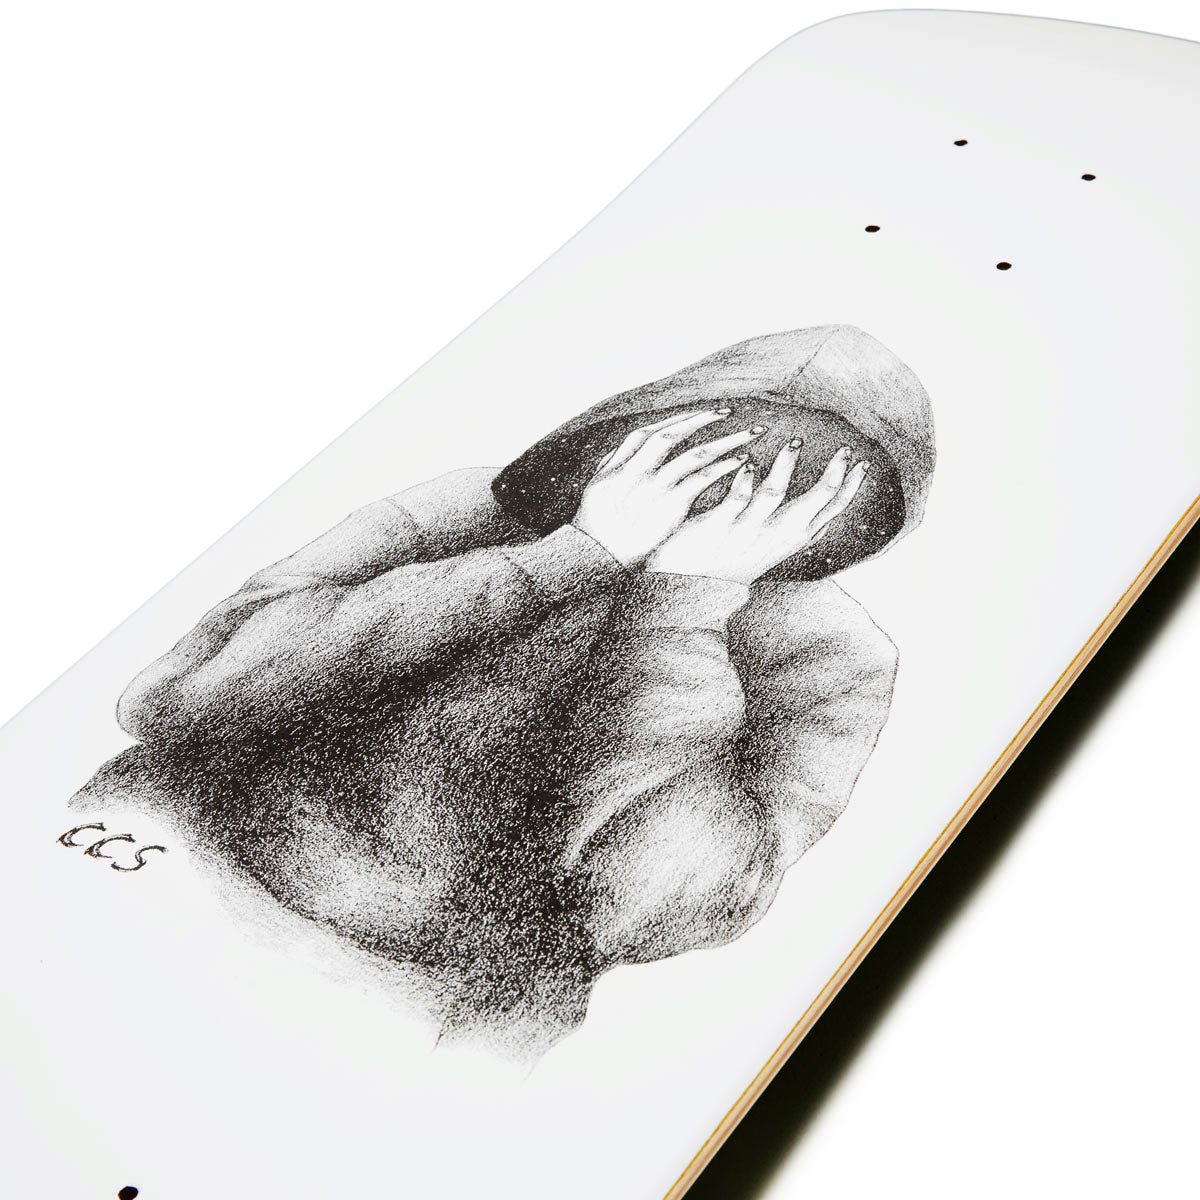 CCS Smile on The Surface Skateboard Deck - White image 3